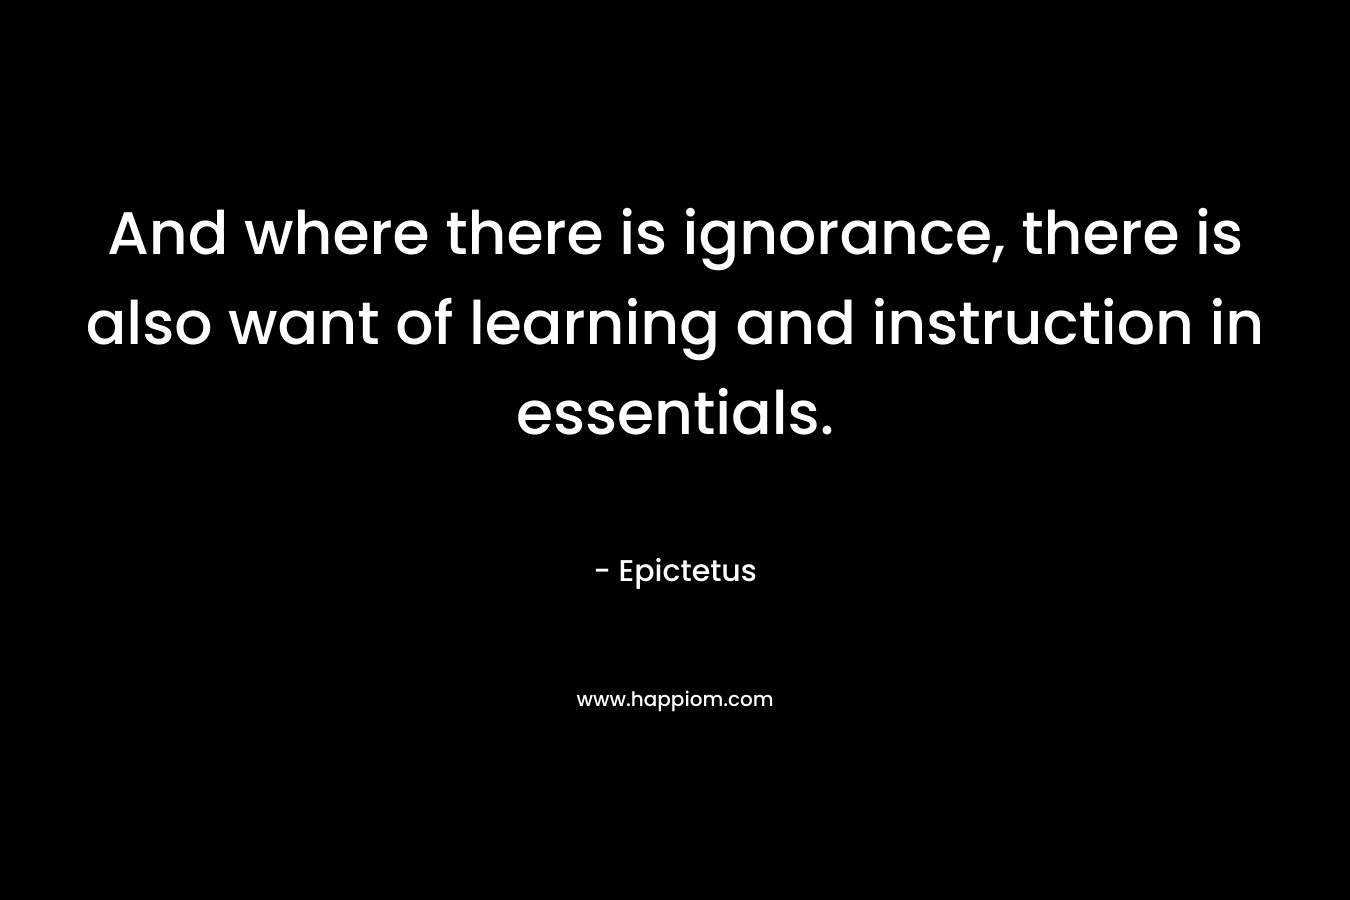 And where there is ignorance, there is also want of learning and instruction in essentials. – Epictetus